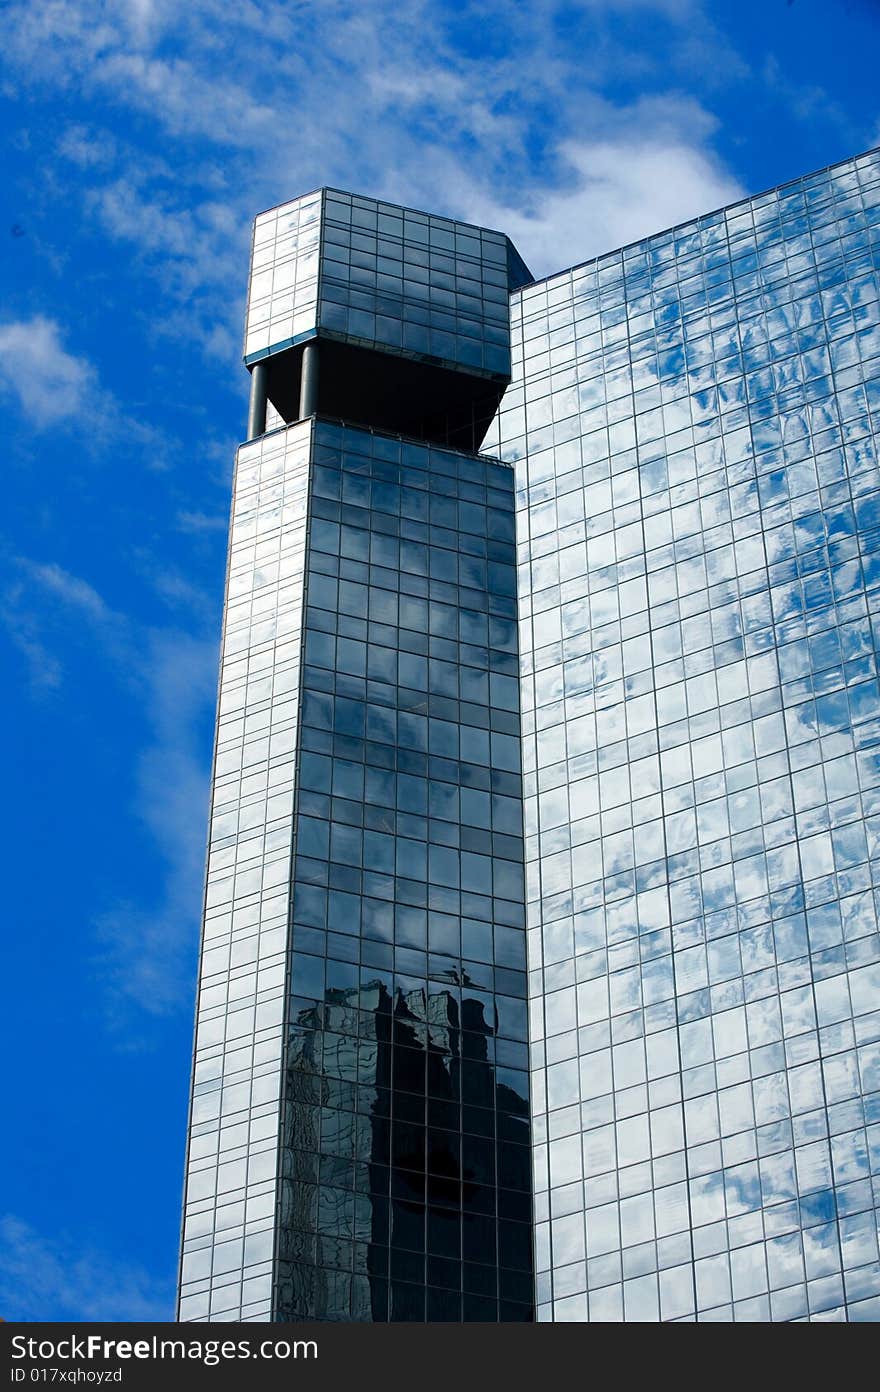 An image of a glass high rise and clouds